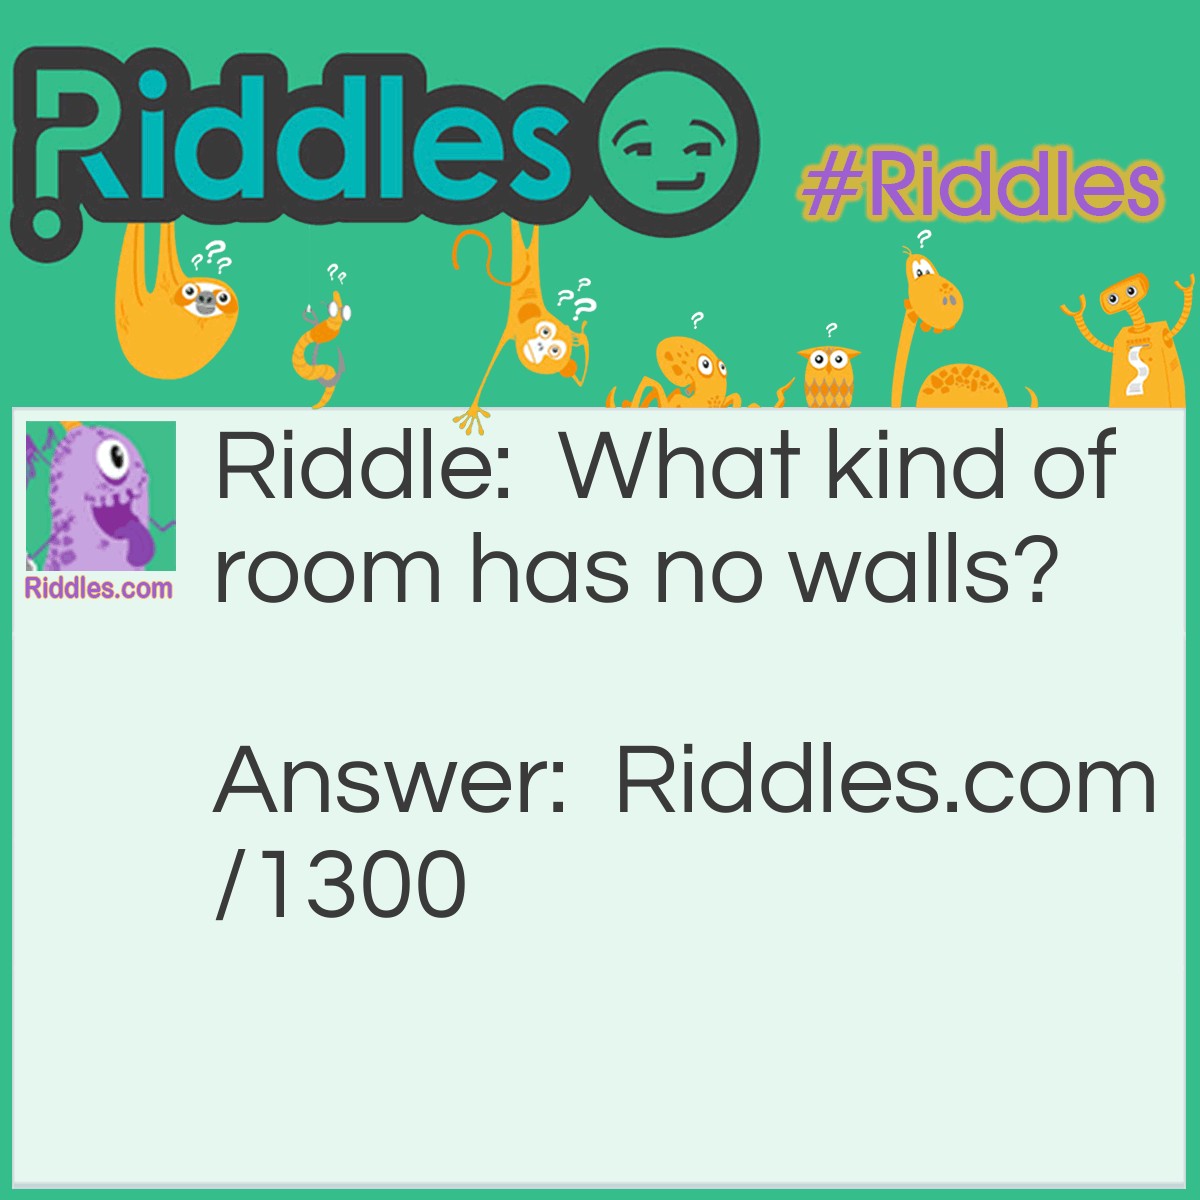 Riddle: What kind of room has no walls? Answer: A Mushroom.